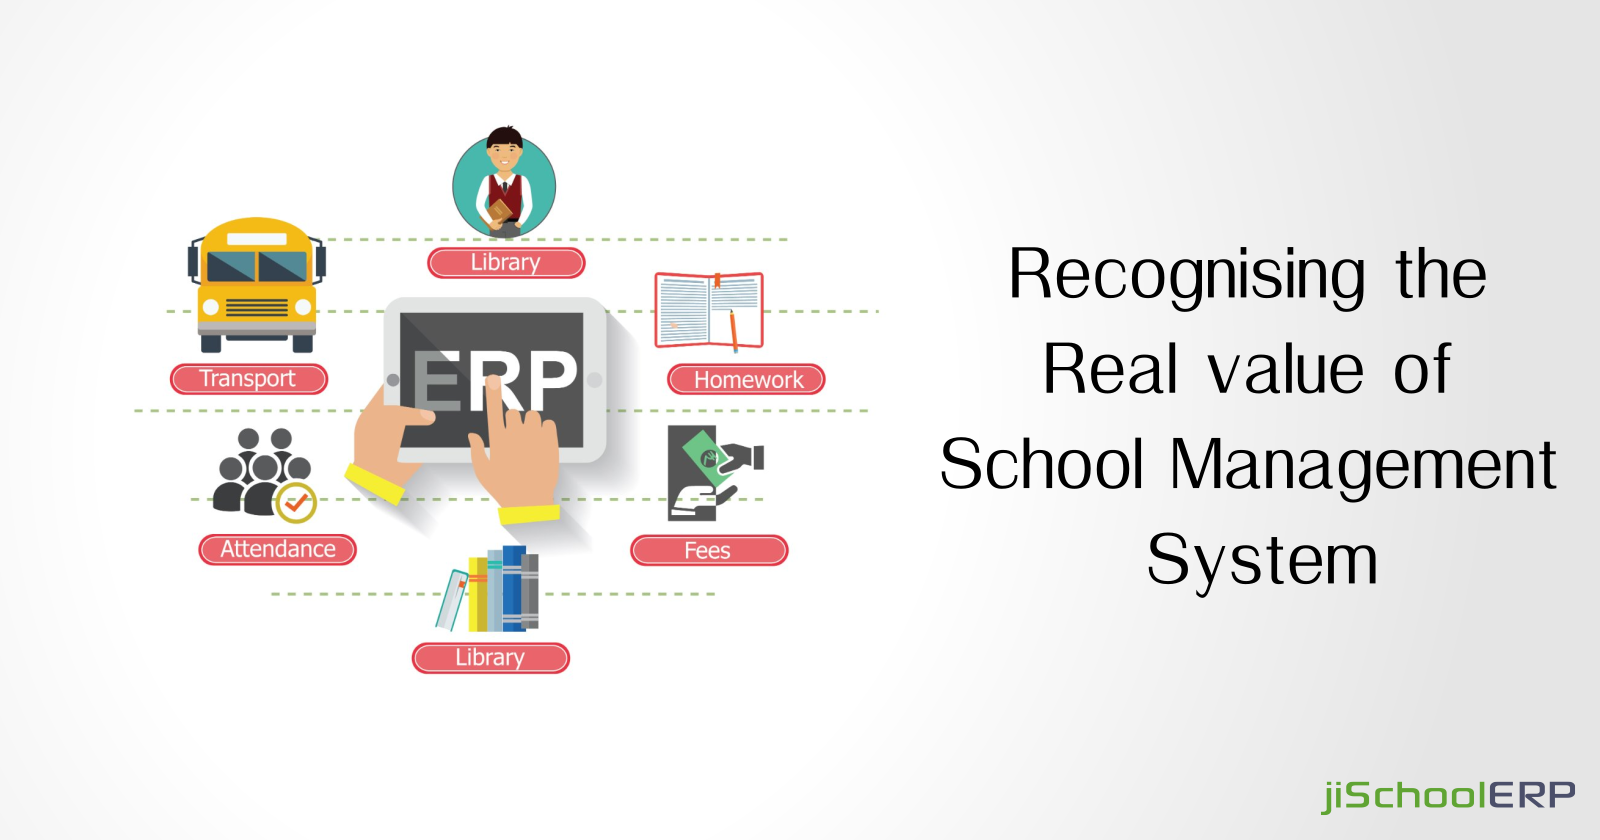 Recognising the Real value of School Management System